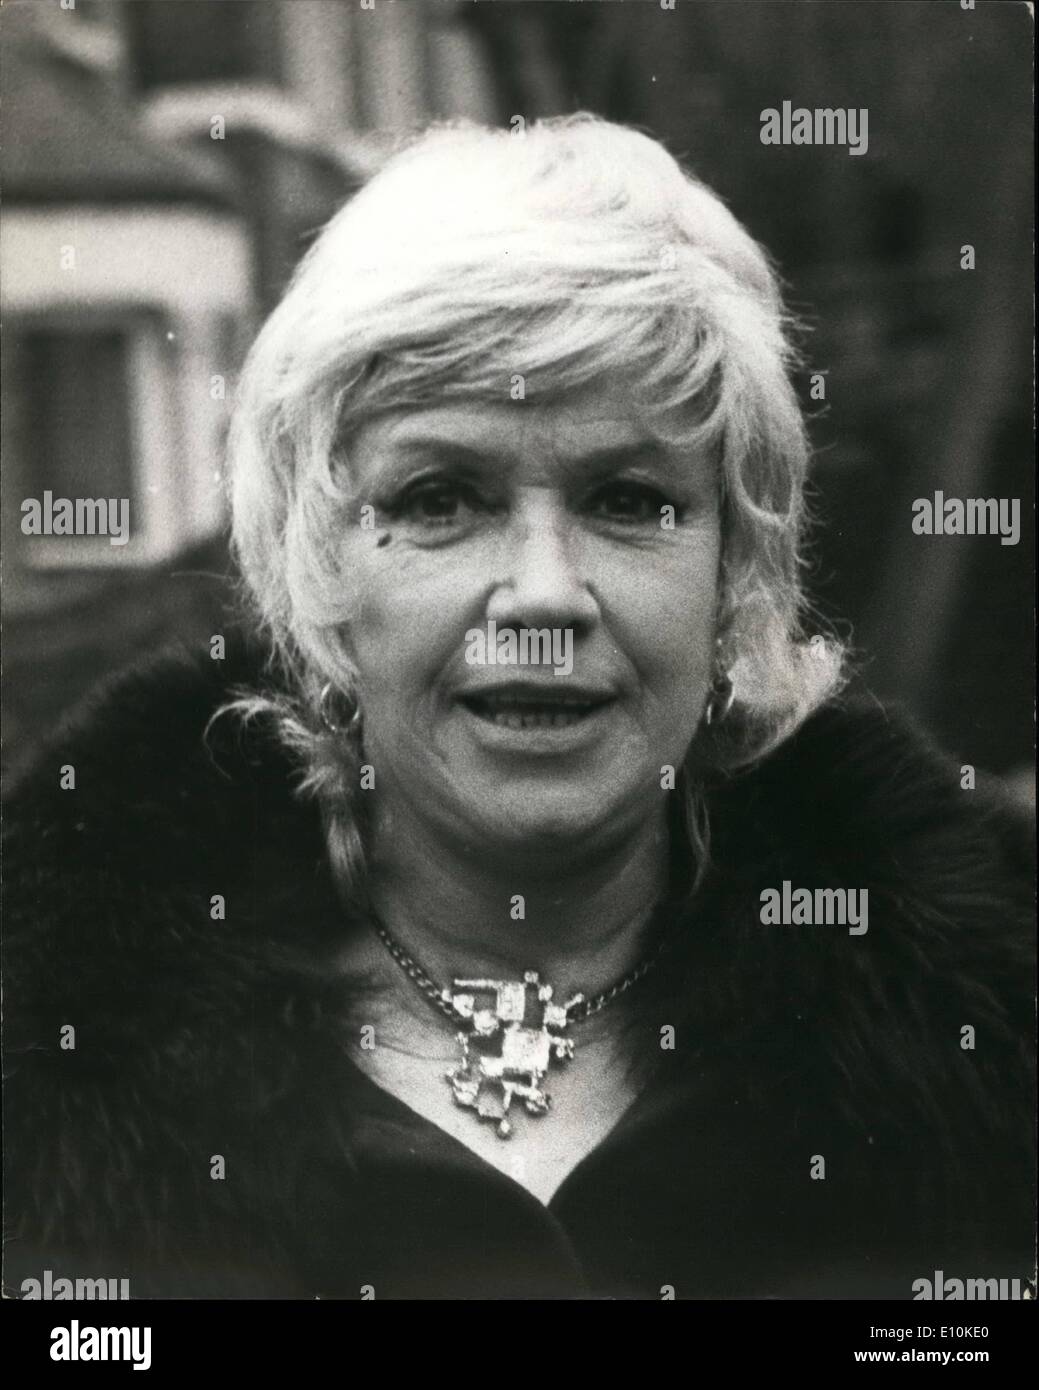 May 05, 1973 - ''Bribery At BBC'' - 15 Arrested. The famous singer Dorothy Squires was arrested today in connection with allegations that BBC producers were bridbed to broadcast pop records. Warrants were issued for the detention of 14 other people, including Janie Jones, West End hostess and former model. Photo Shows:- Singer Dorothy Squires. Stock Photo